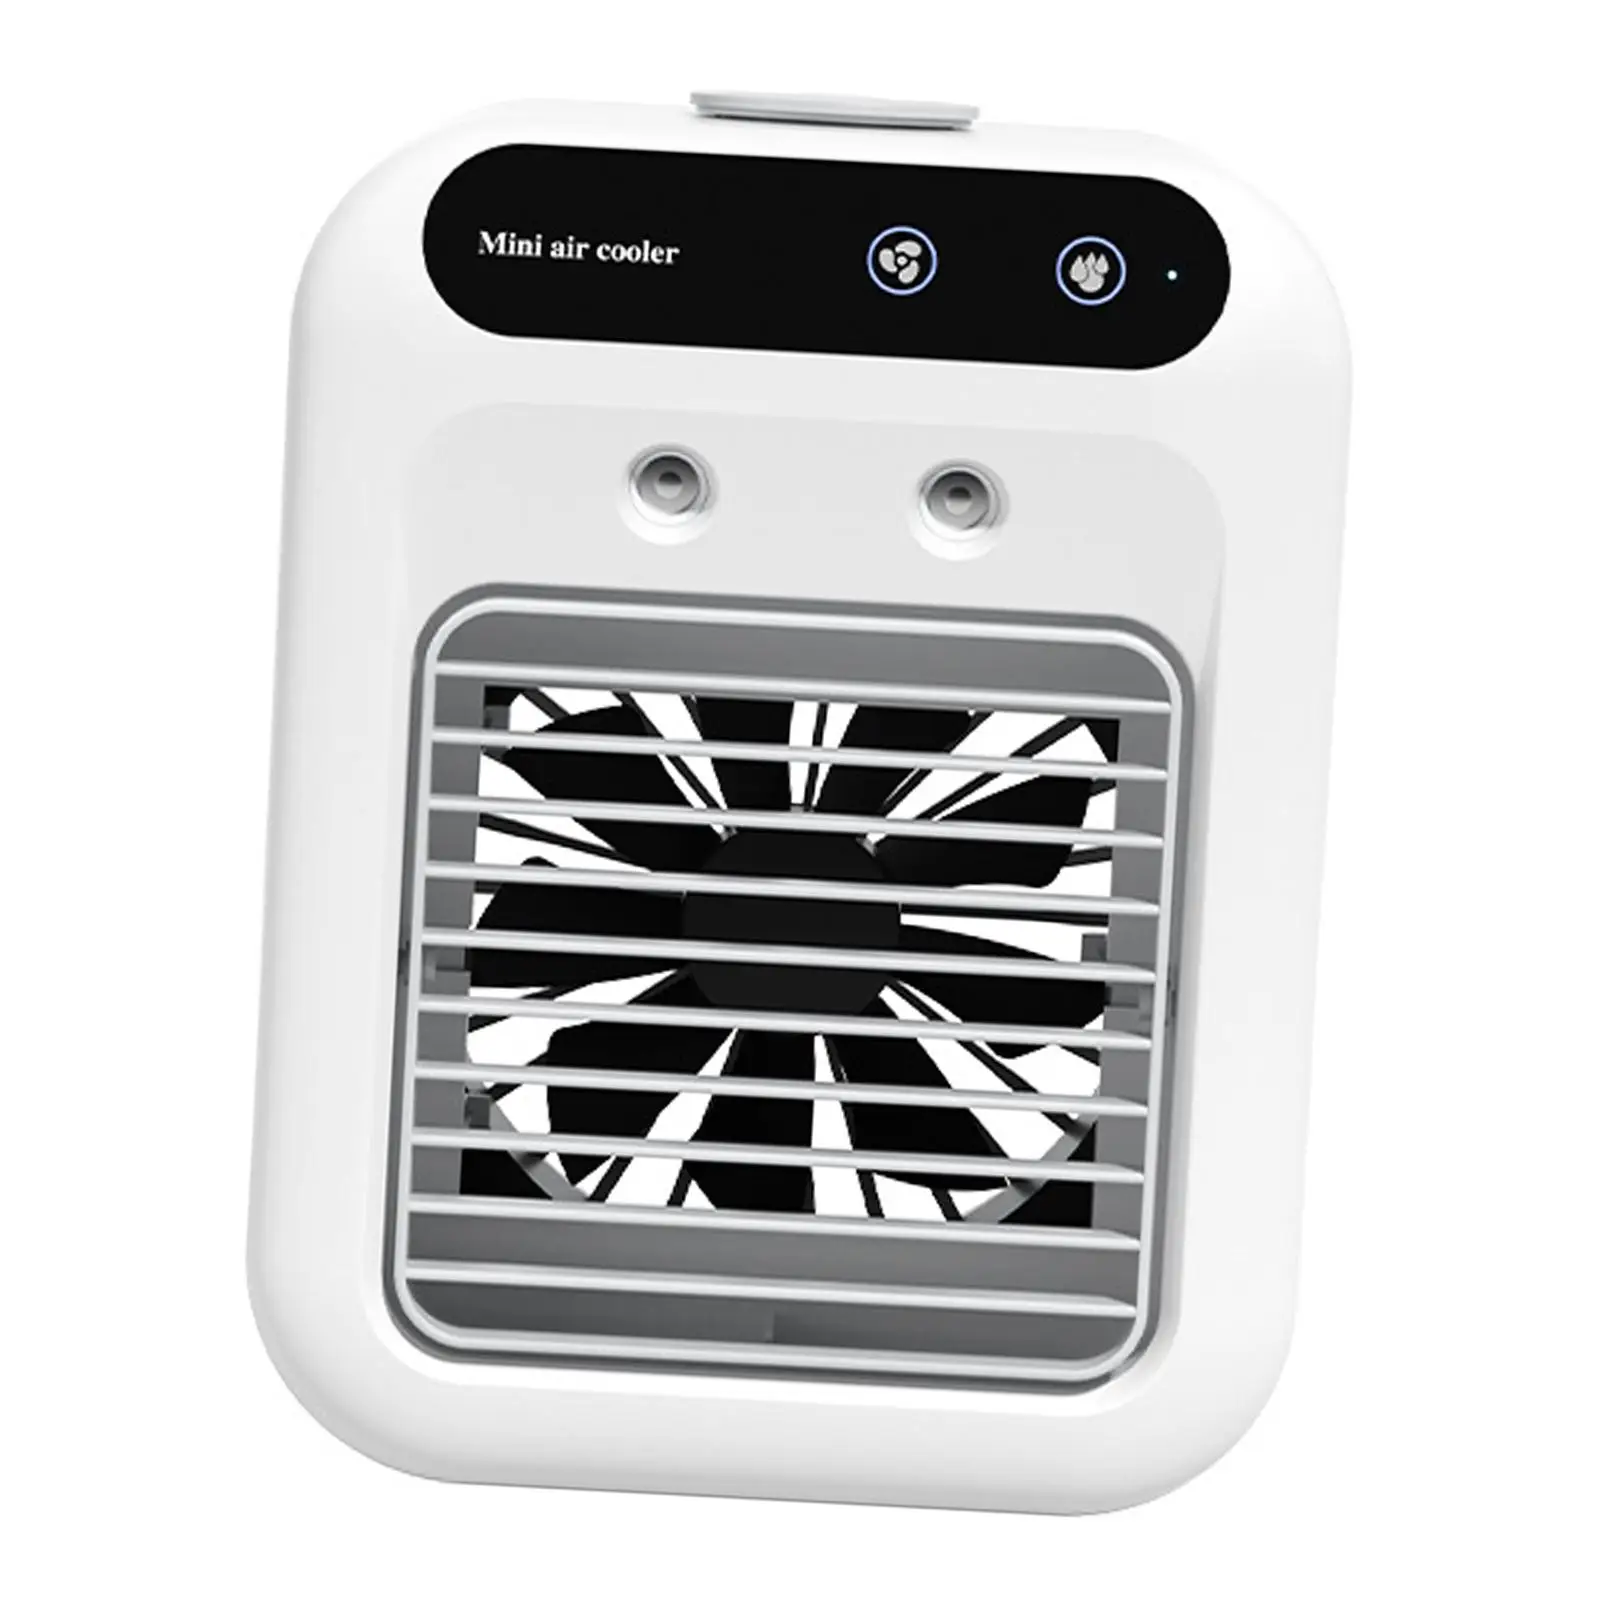 Portable Air Conditioner Humidifier Personal Space with 2 Speeds Evaporative Air Cooler Fan for Camping Bedroom Home Household